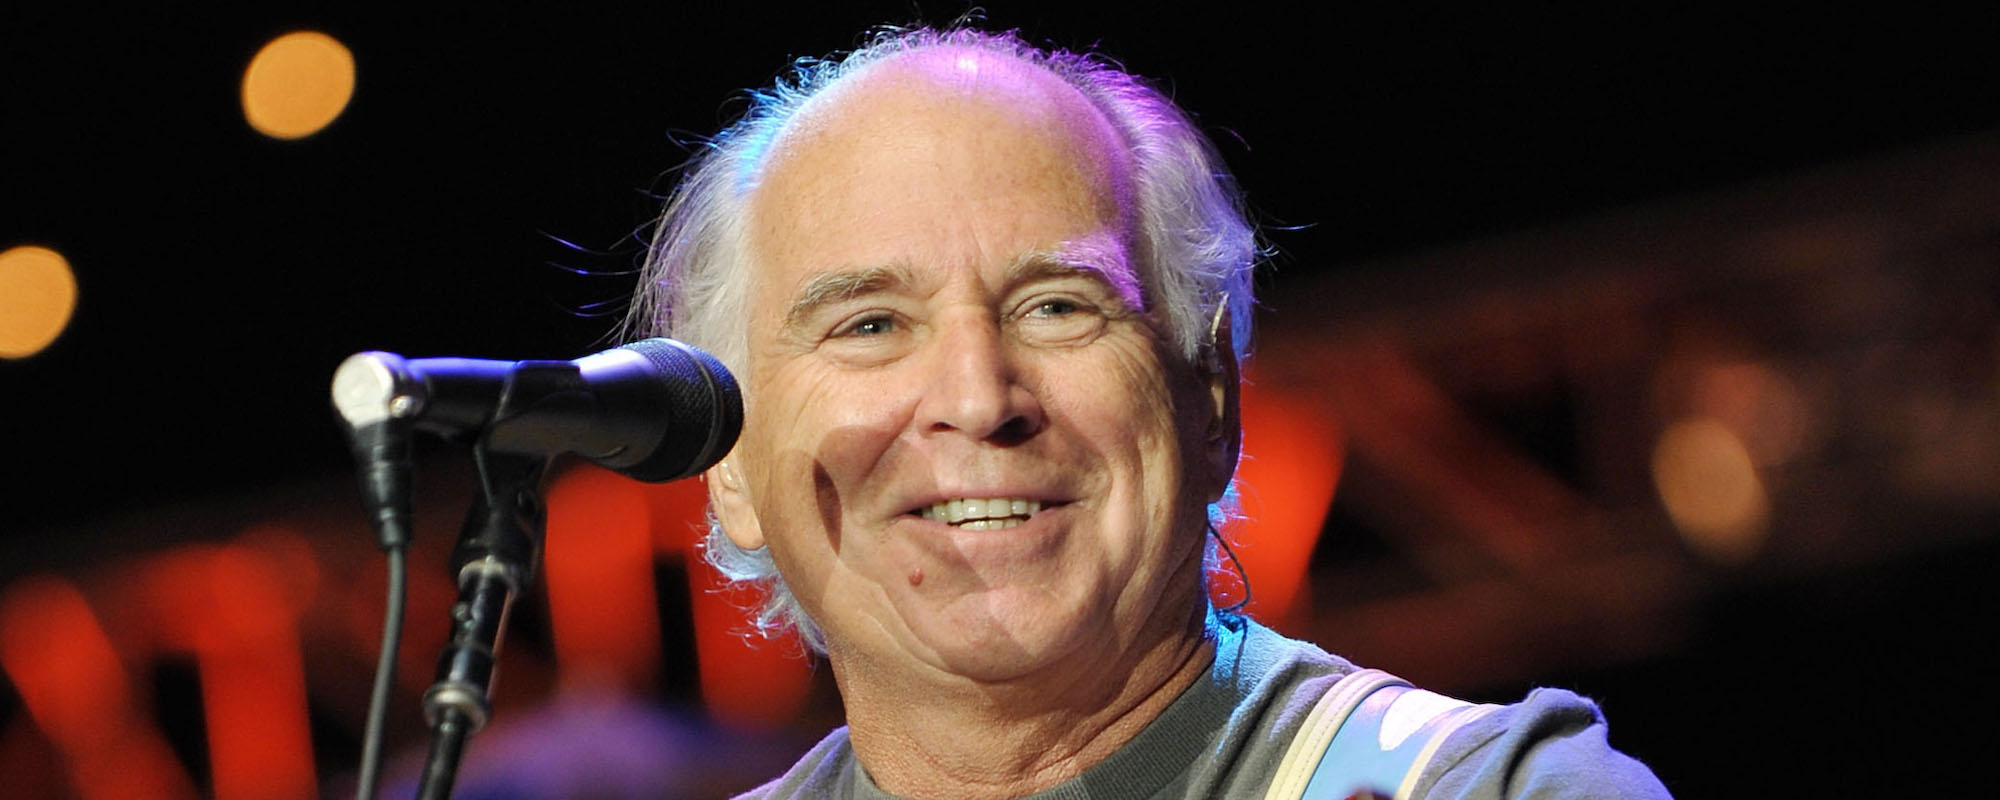 Watch: First Look at Jimmy Buffett’s New Video “Like My Dog” with Pet Adoption Message